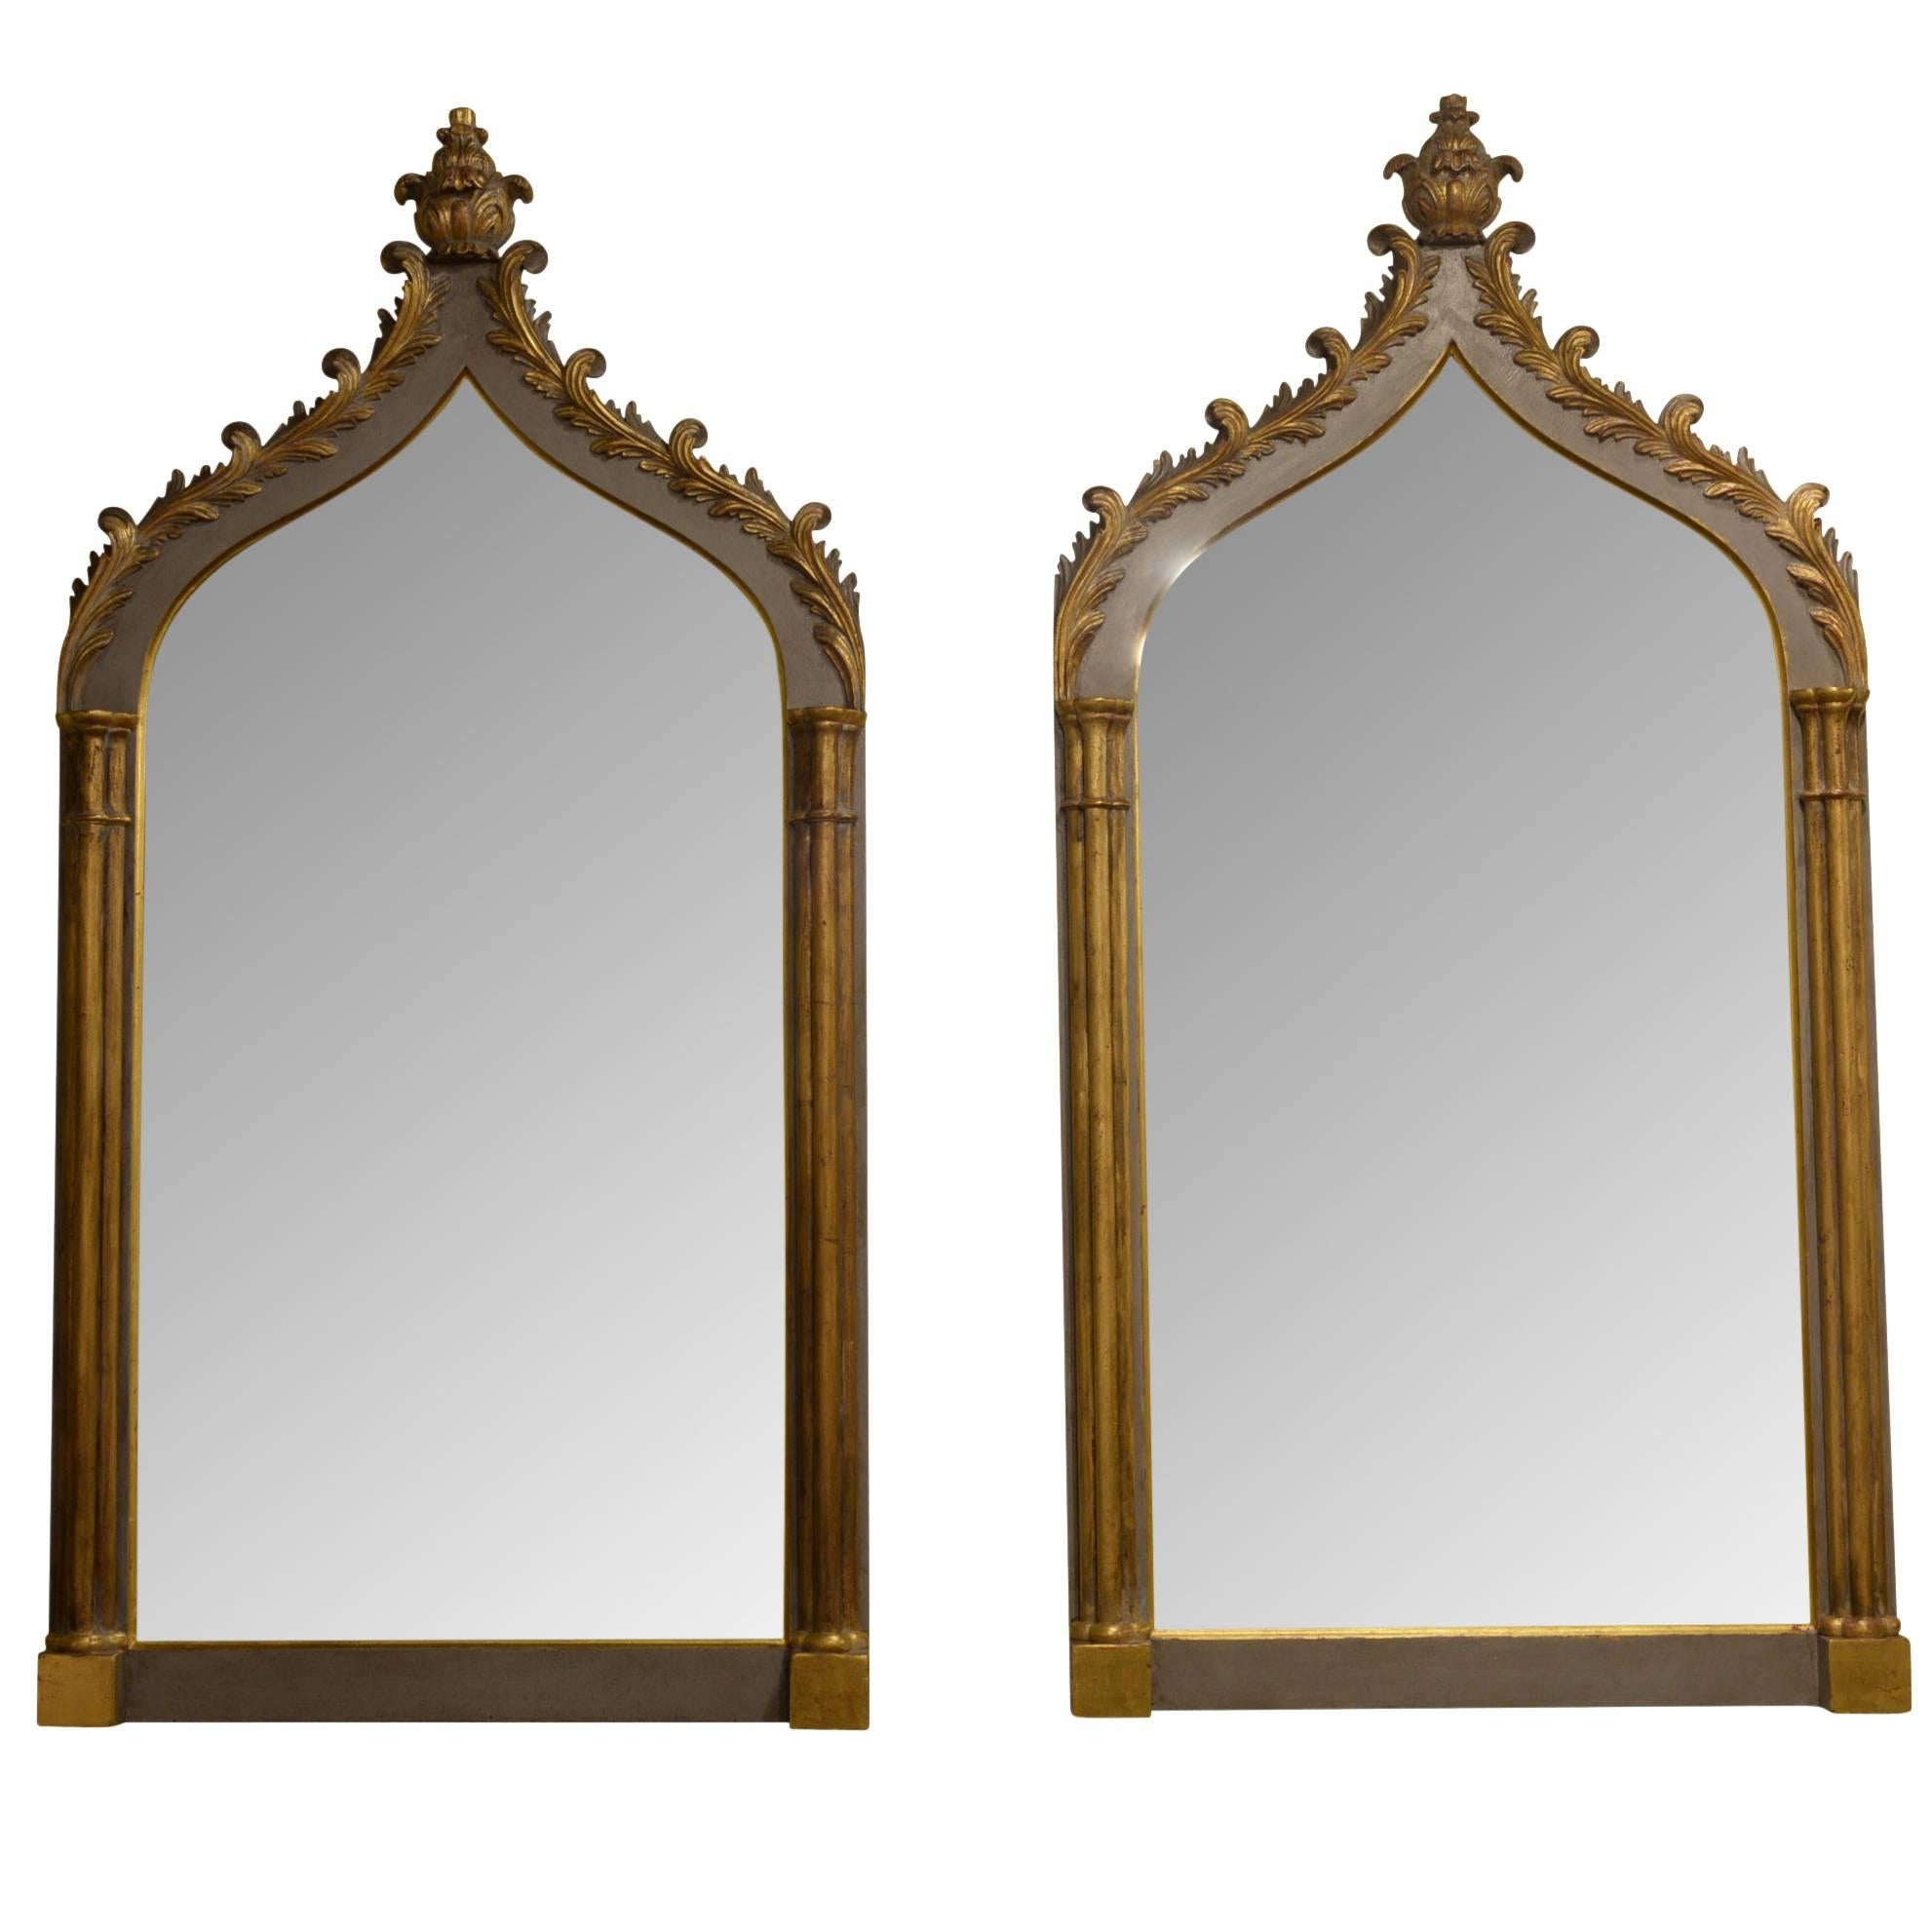 Pair of Carved Wood Gothic Revival Mirrors